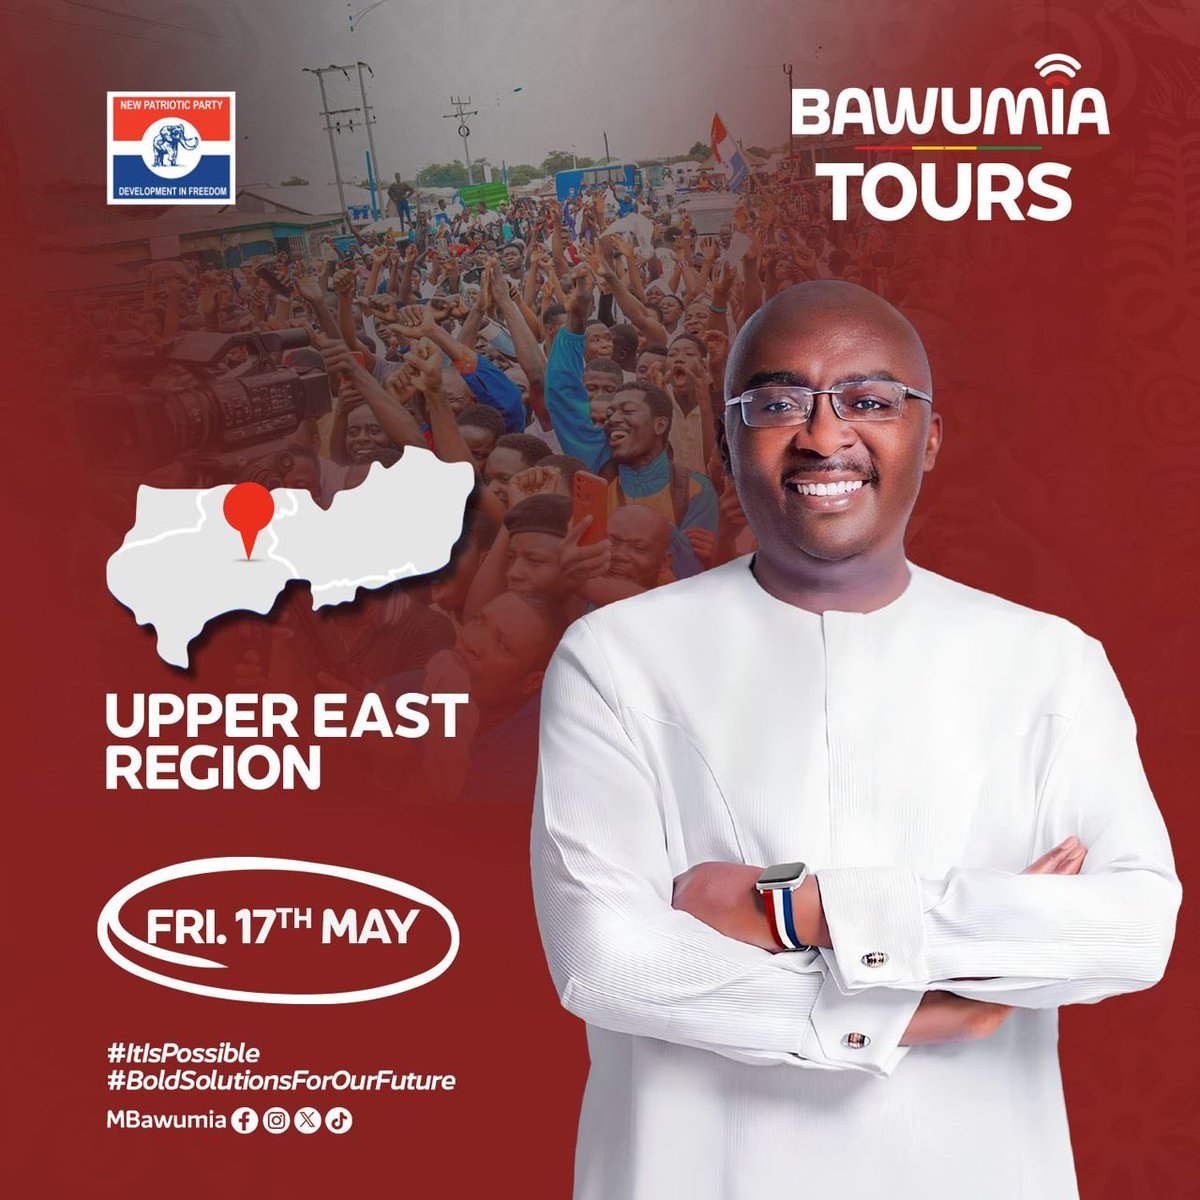 #Bawumia2024 
#ItIsPossible 
#BoldSolutionsForOurFuture
#GhanasNextChapter 
#BawumiaTours            

The bus of possibilities has reached Upper East